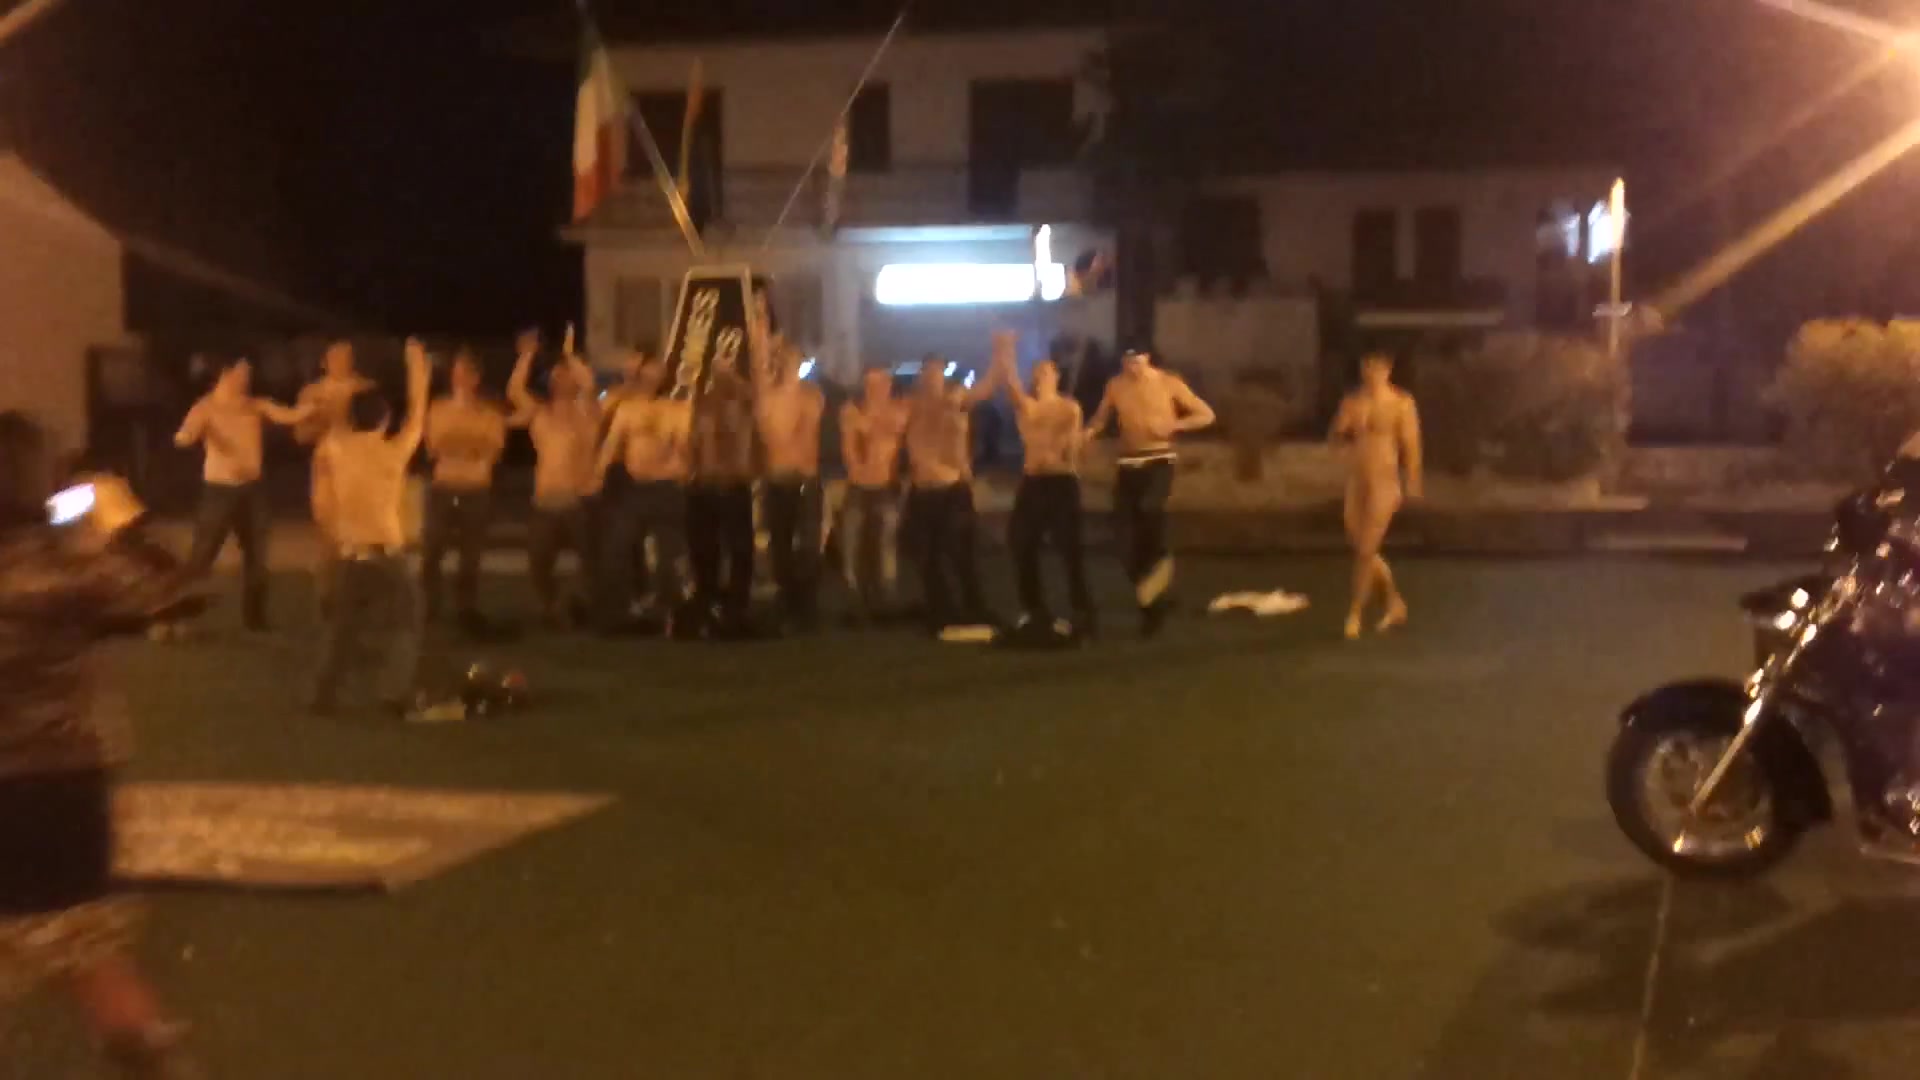 RUGBY GUYS ON THE PARTY OUTSIDE